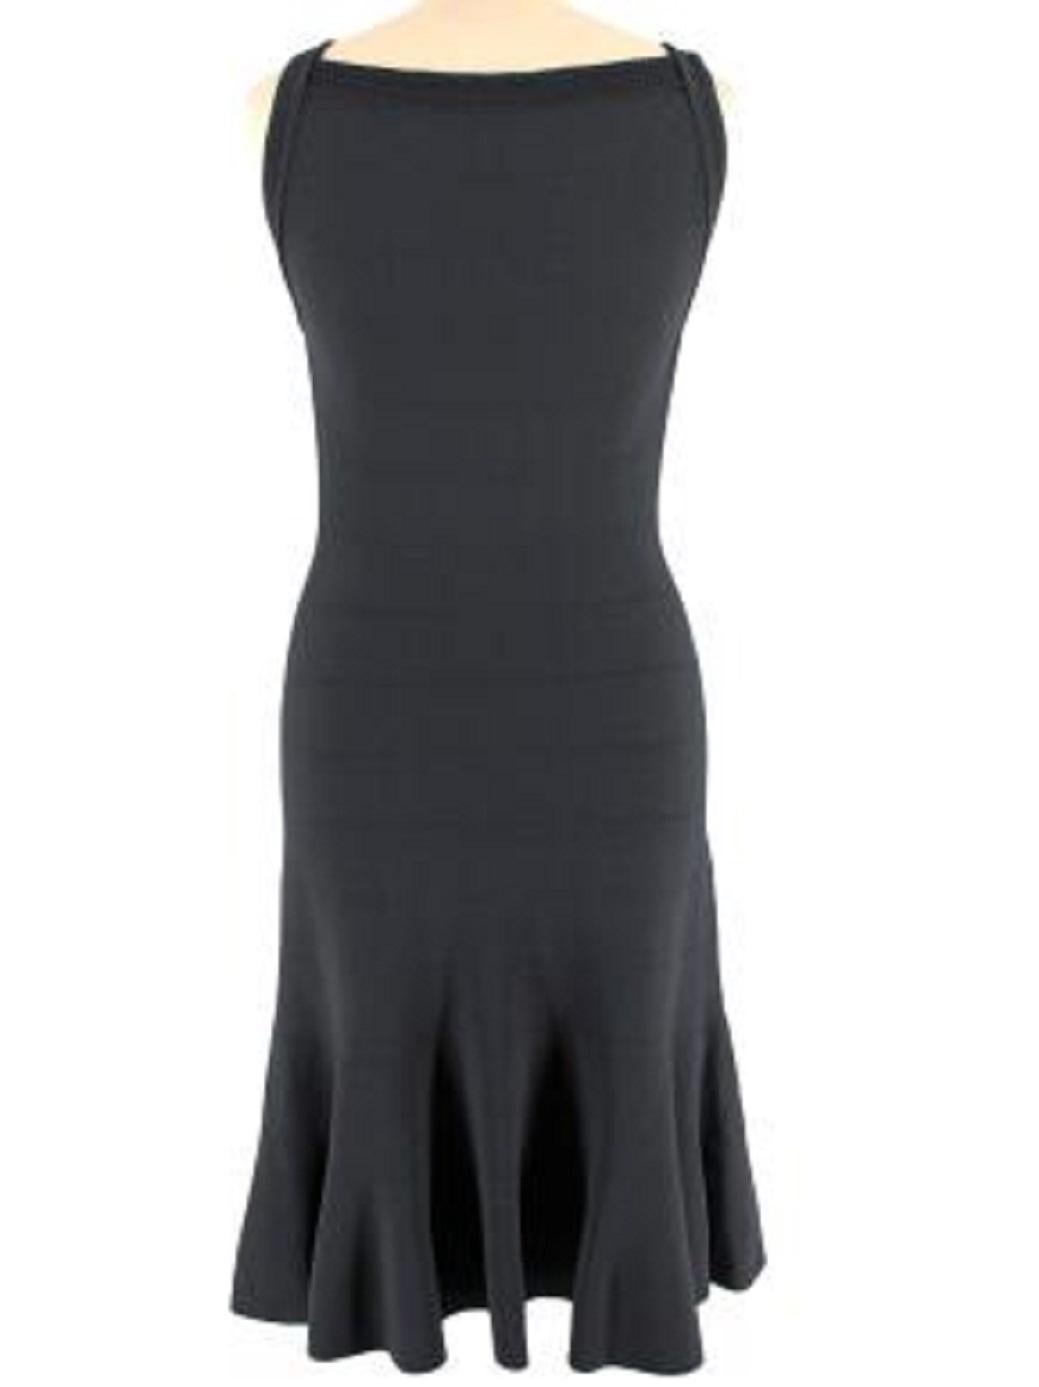 Alaia Grey Fit & Flare Stretch Knit Dress In Excellent Condition For Sale In London, GB